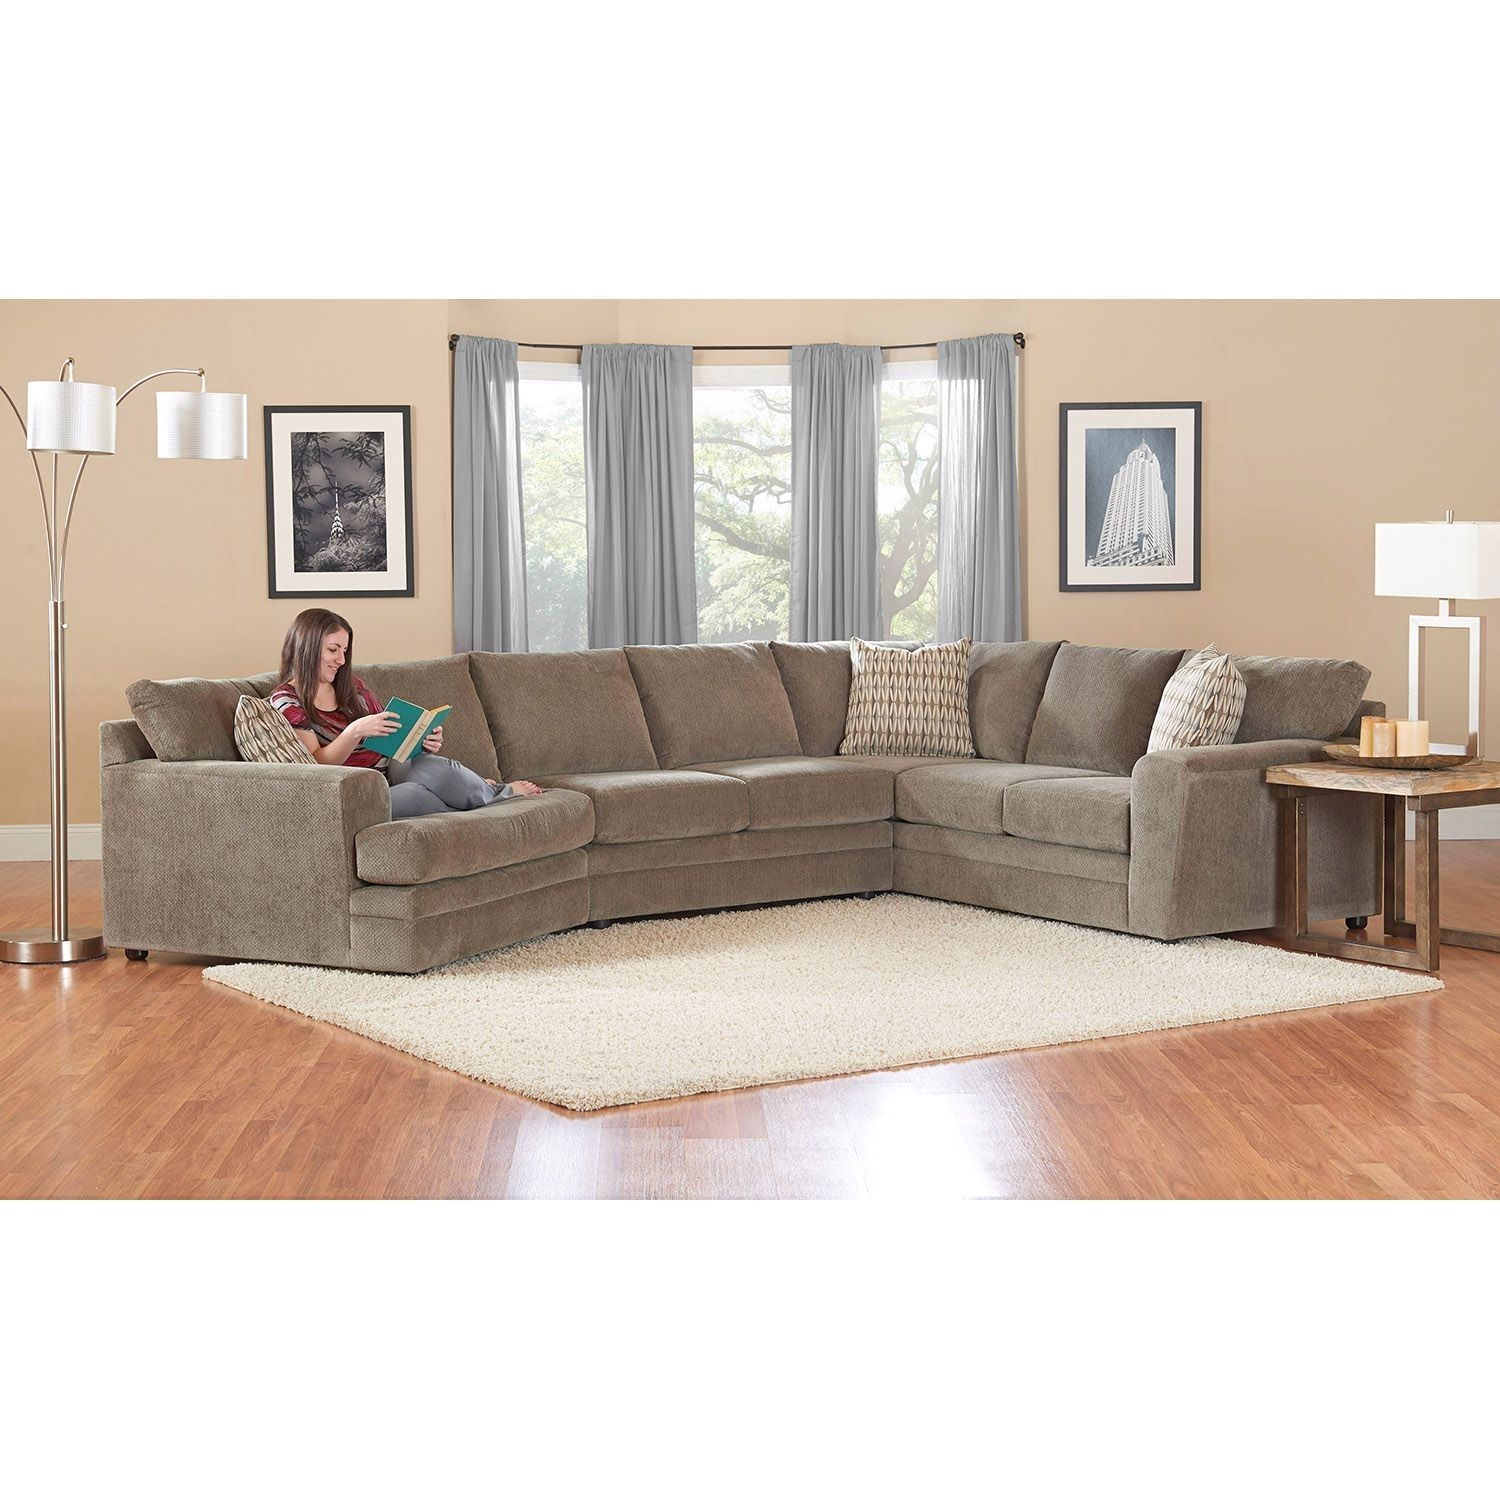 Prestige Ashburn Sectional Sofa – Sam's Club Gray Couch | Home Within Sams Club Sectional Sofas (View 1 of 10)